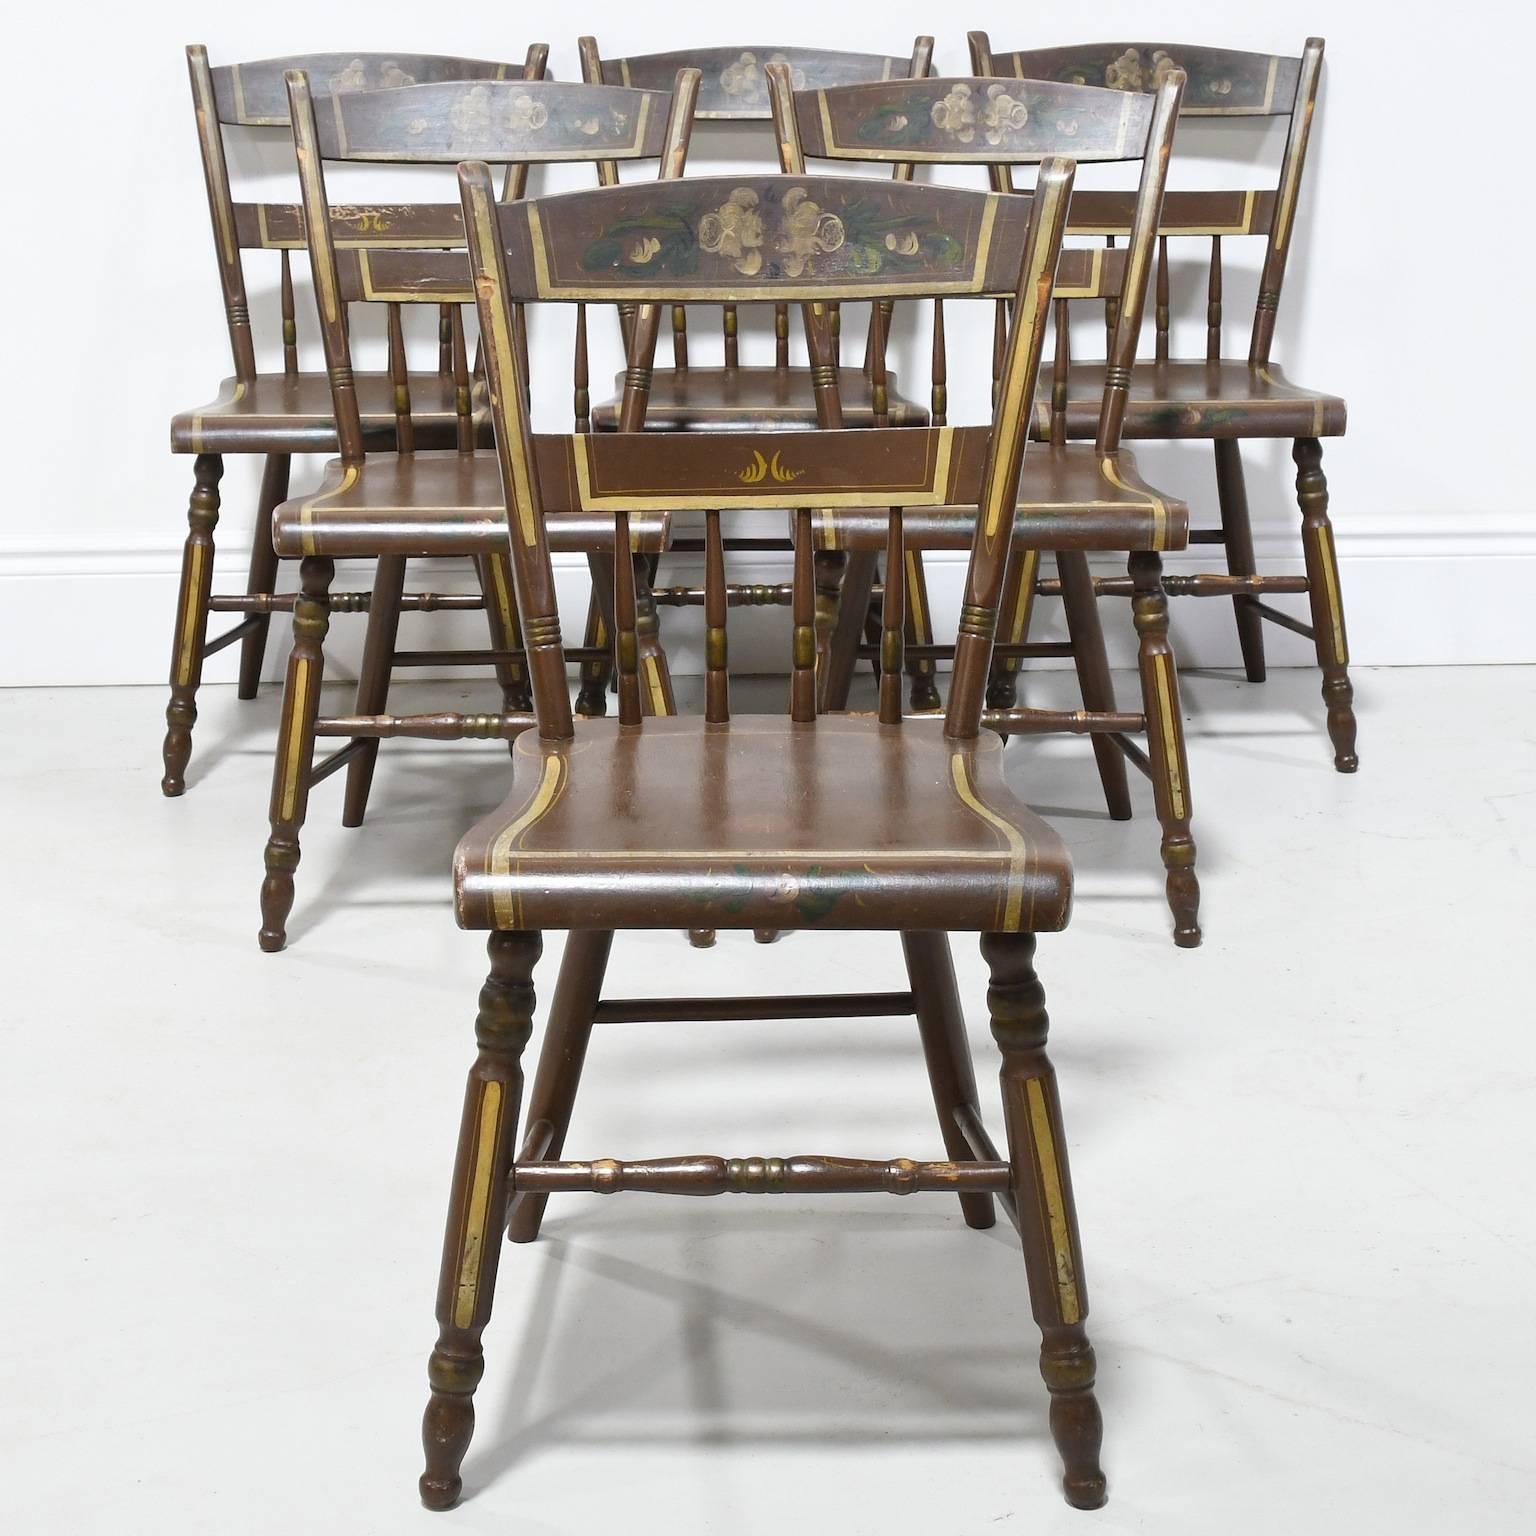 A beautiful collection of six Pennsylvania 1/2 spindle back plank seat paint decorated chairs from Ephrata area in Lancaster County Pennsylvania dating from the mid to late 1800s. Note the worn styles on all chairs where the chairs would have been